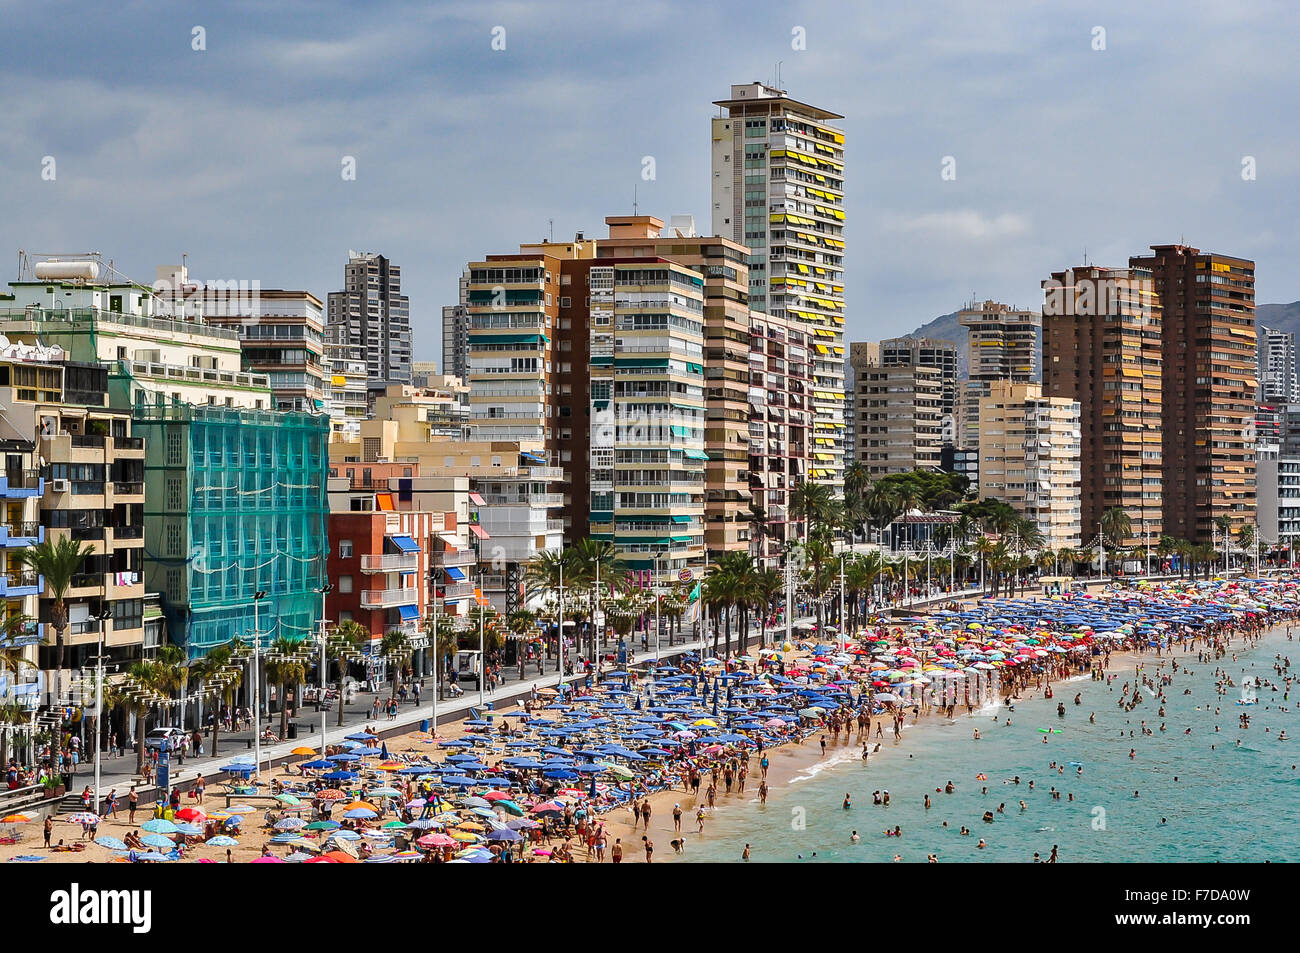 Crowded beach of Benidorm on a cloudy day, Spain Stock Photo